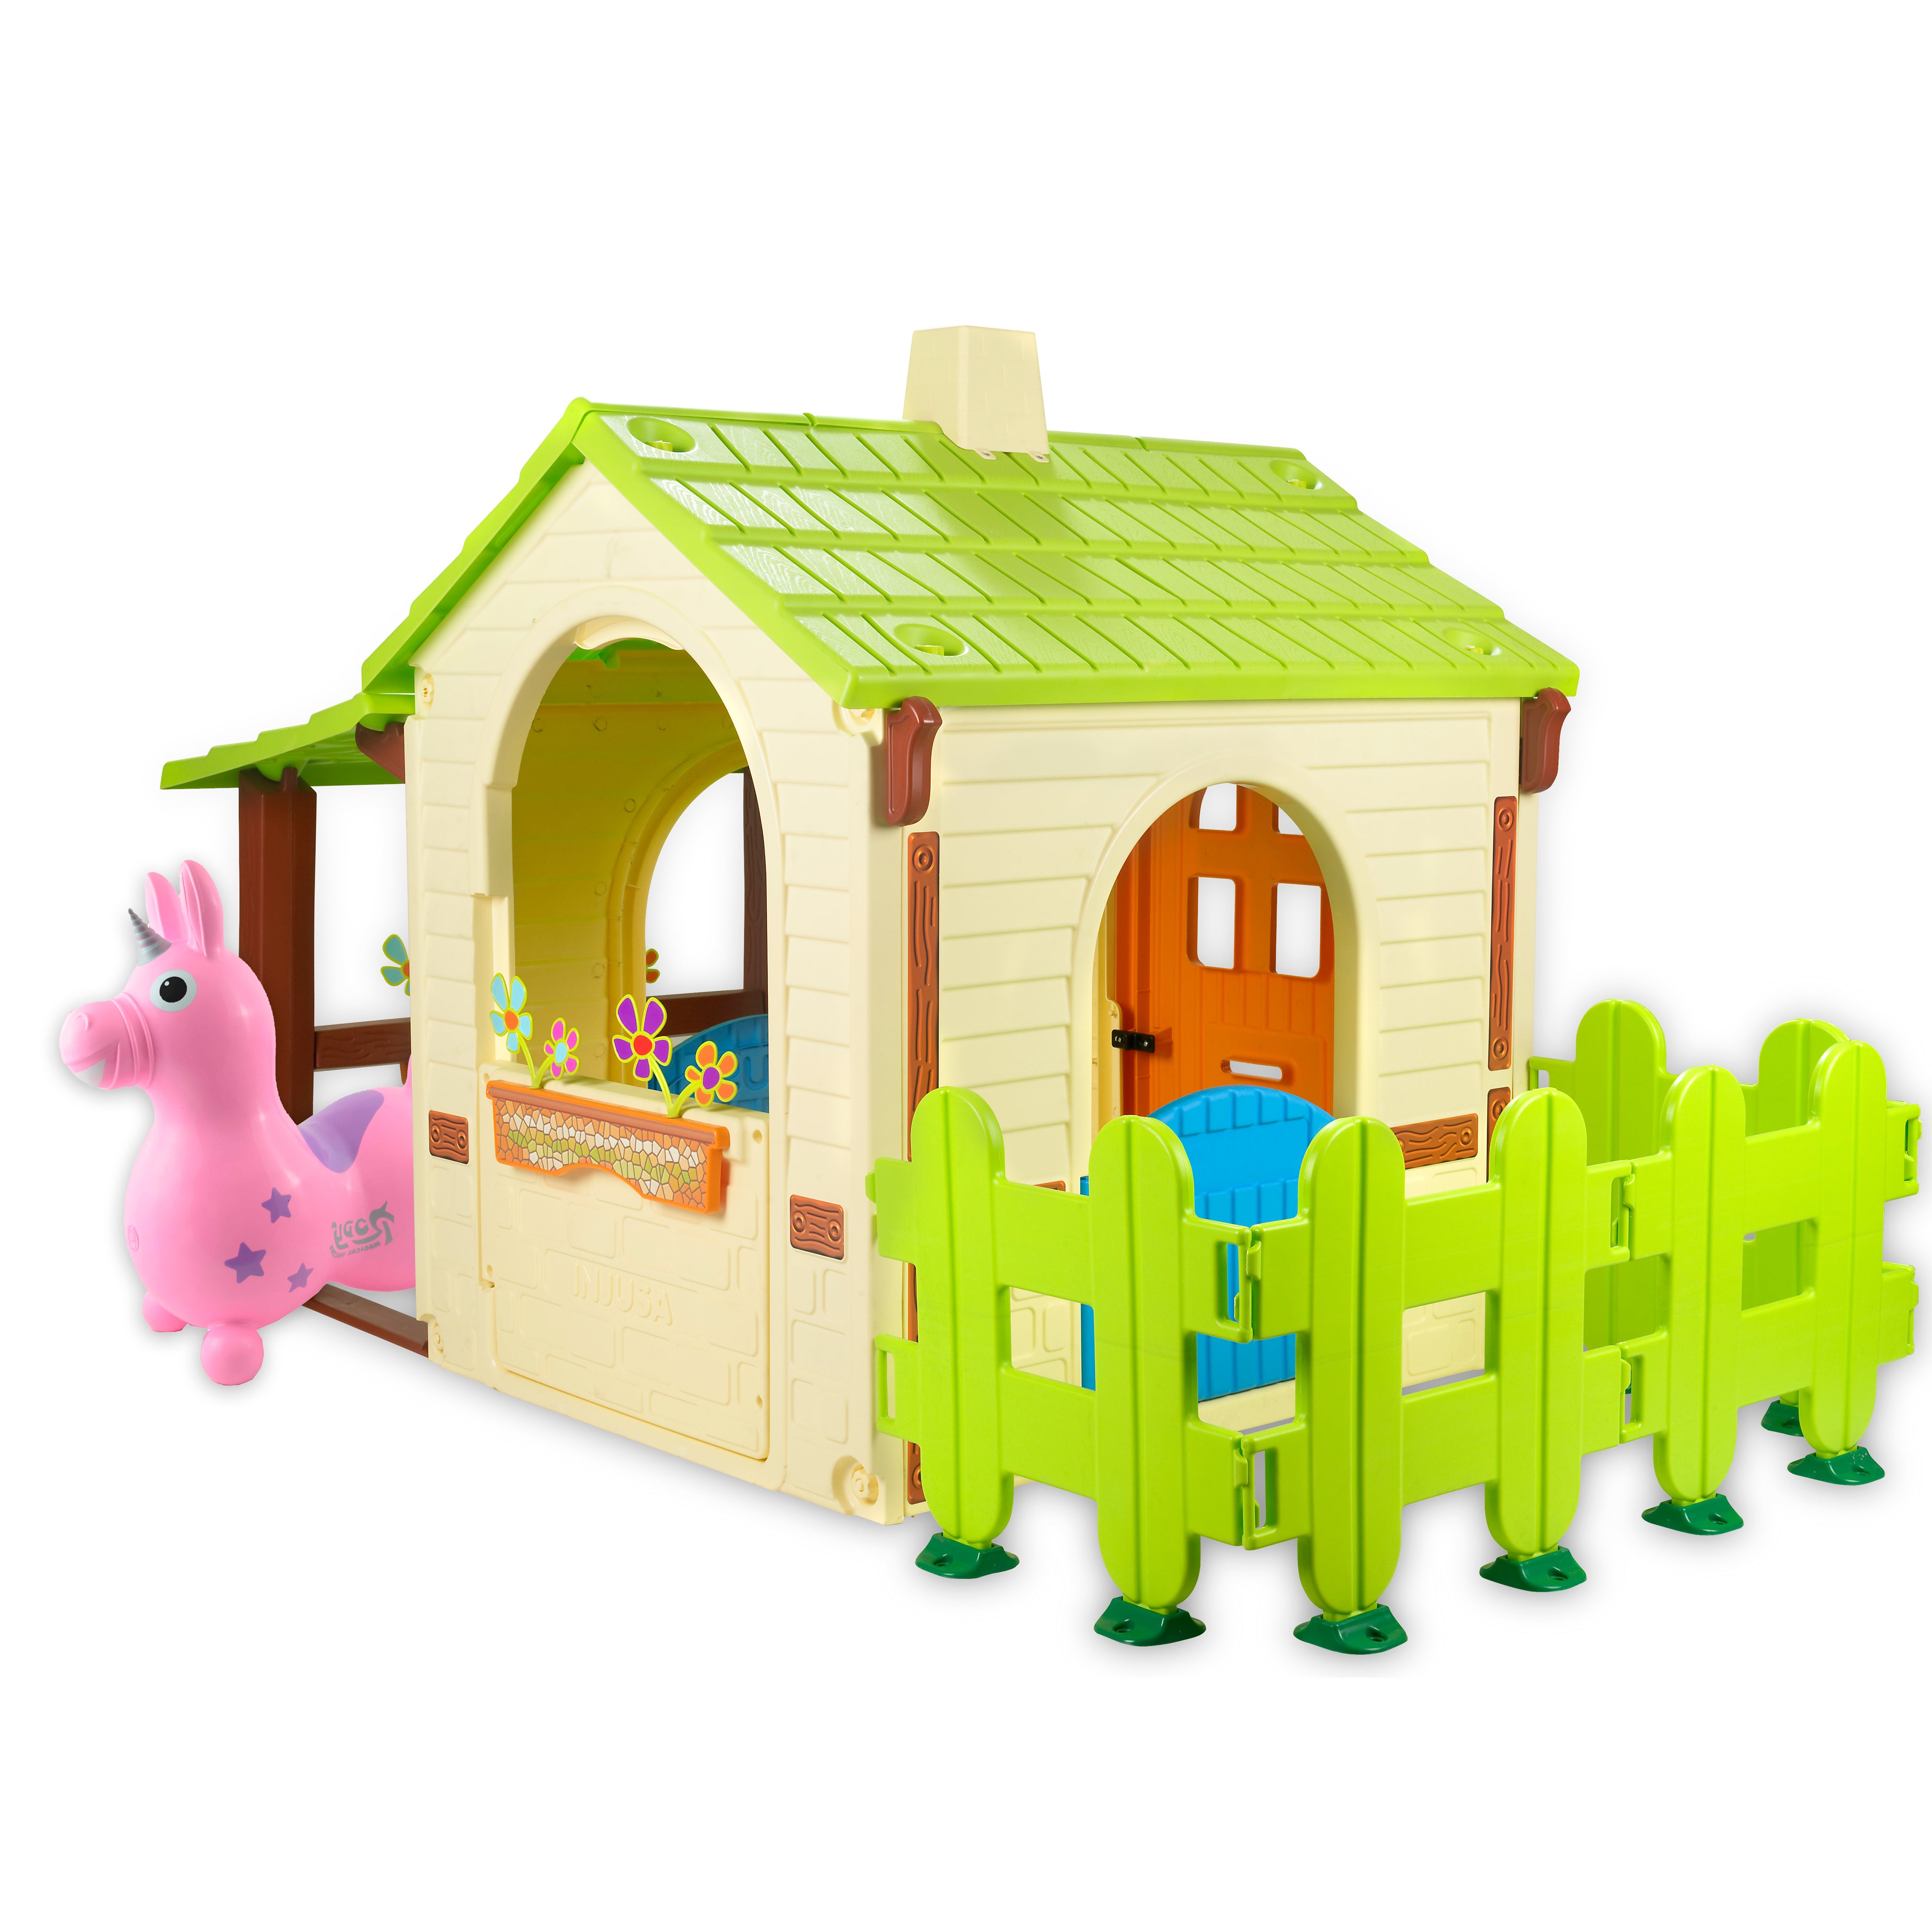 Studio image of the Country Playhouse with the Pink Rody Magical Unicorn.